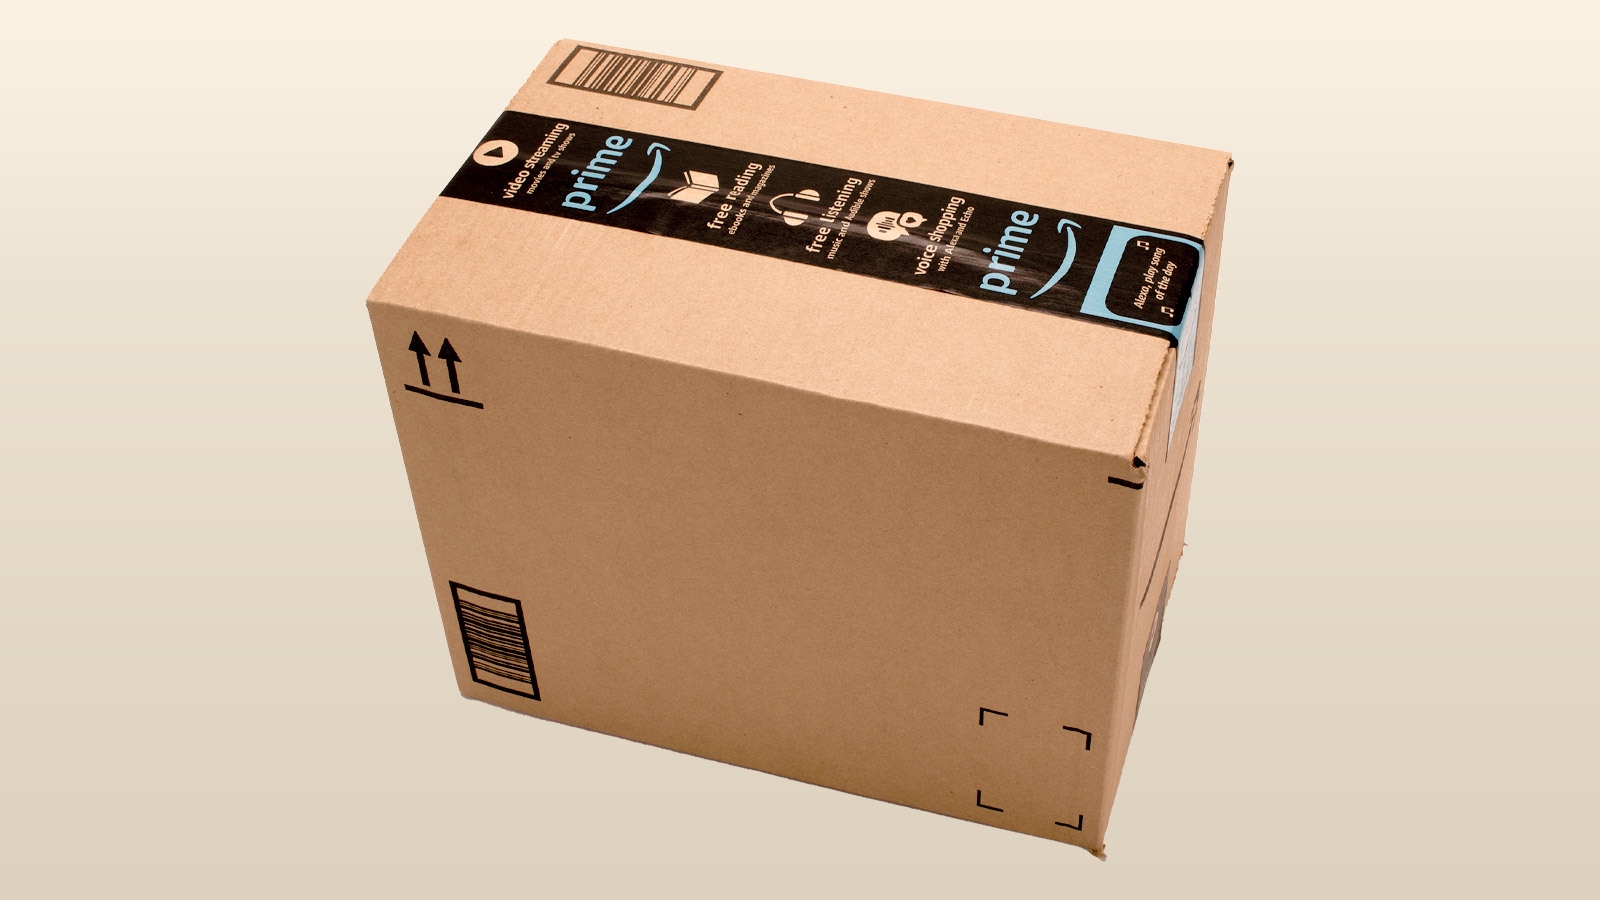 An image of an amazon package with a beige background.